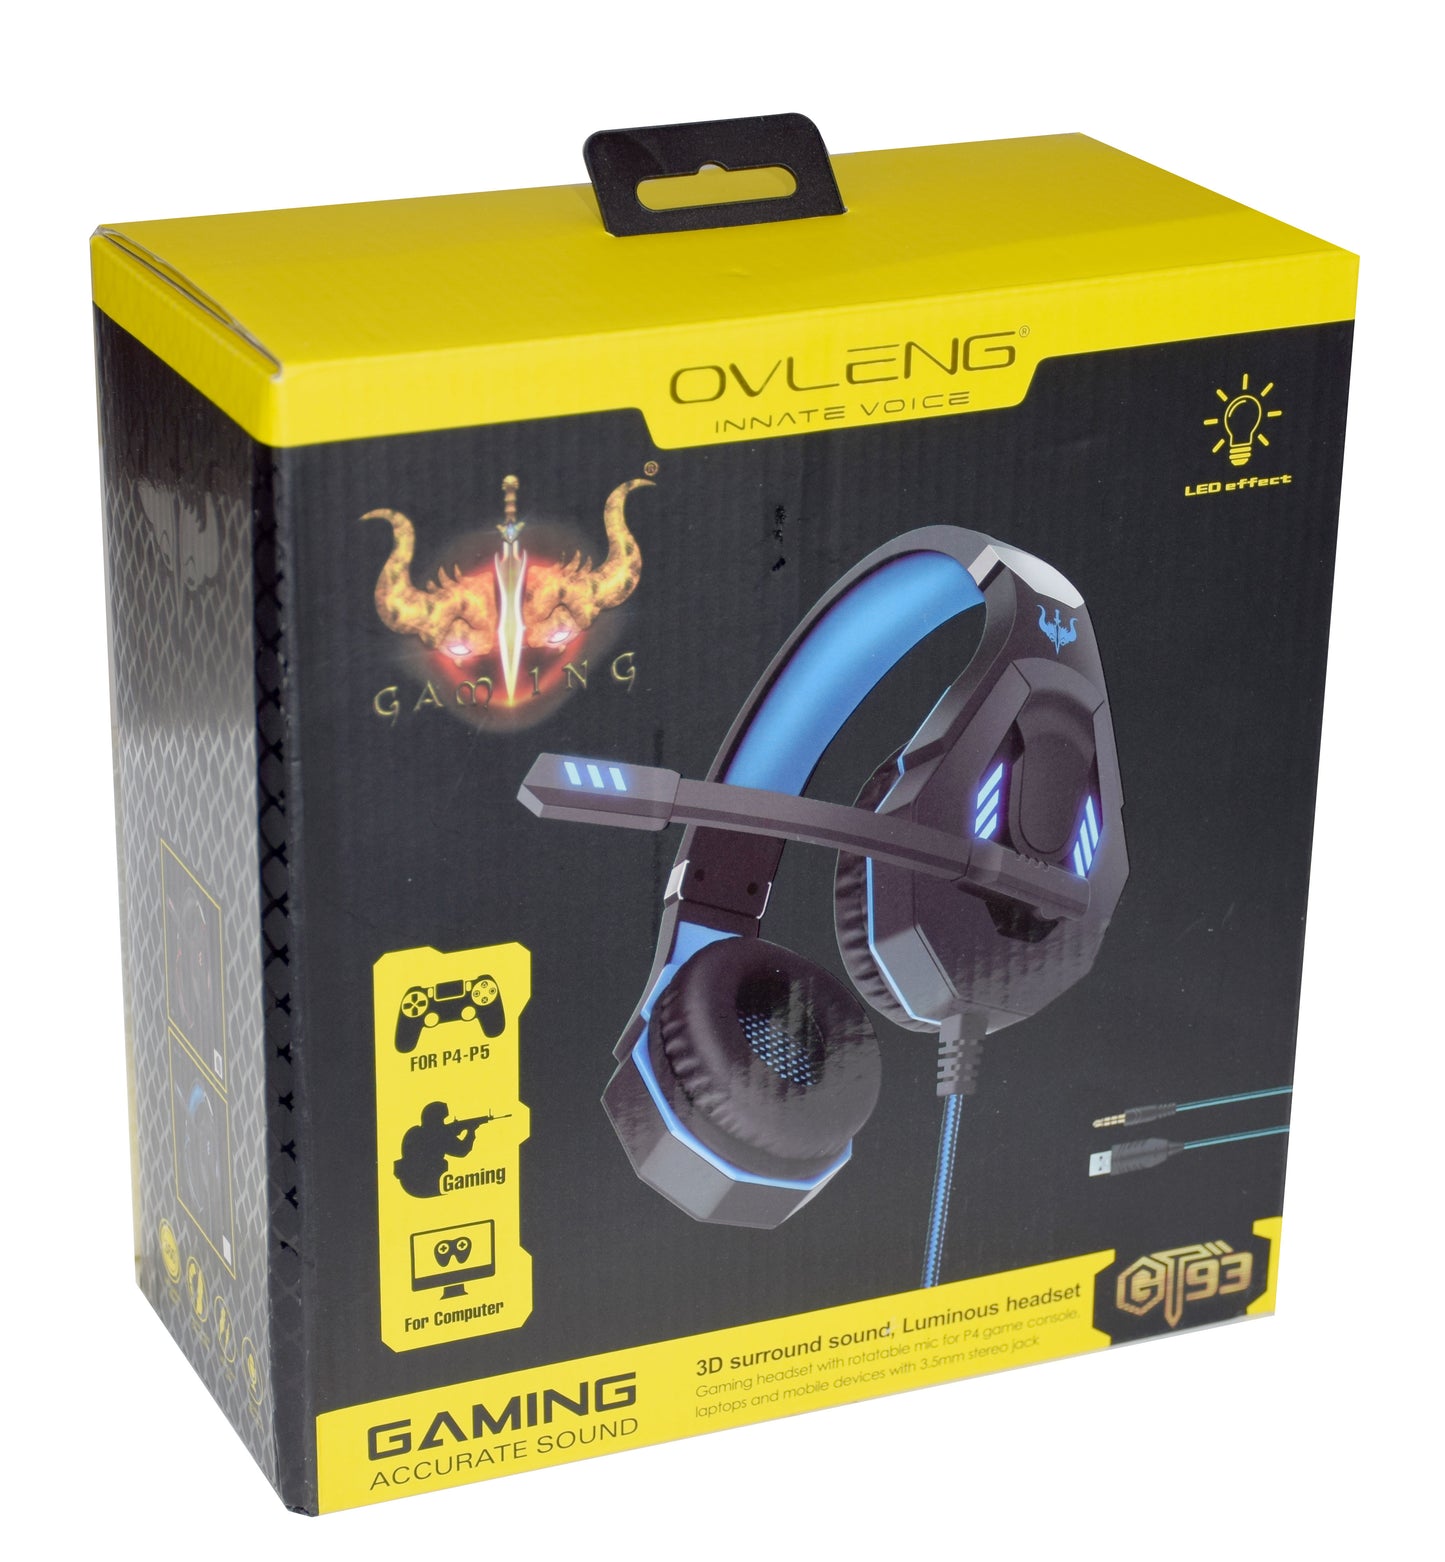 OVLENG Cuffia gaming USB con led blue GT 93BL